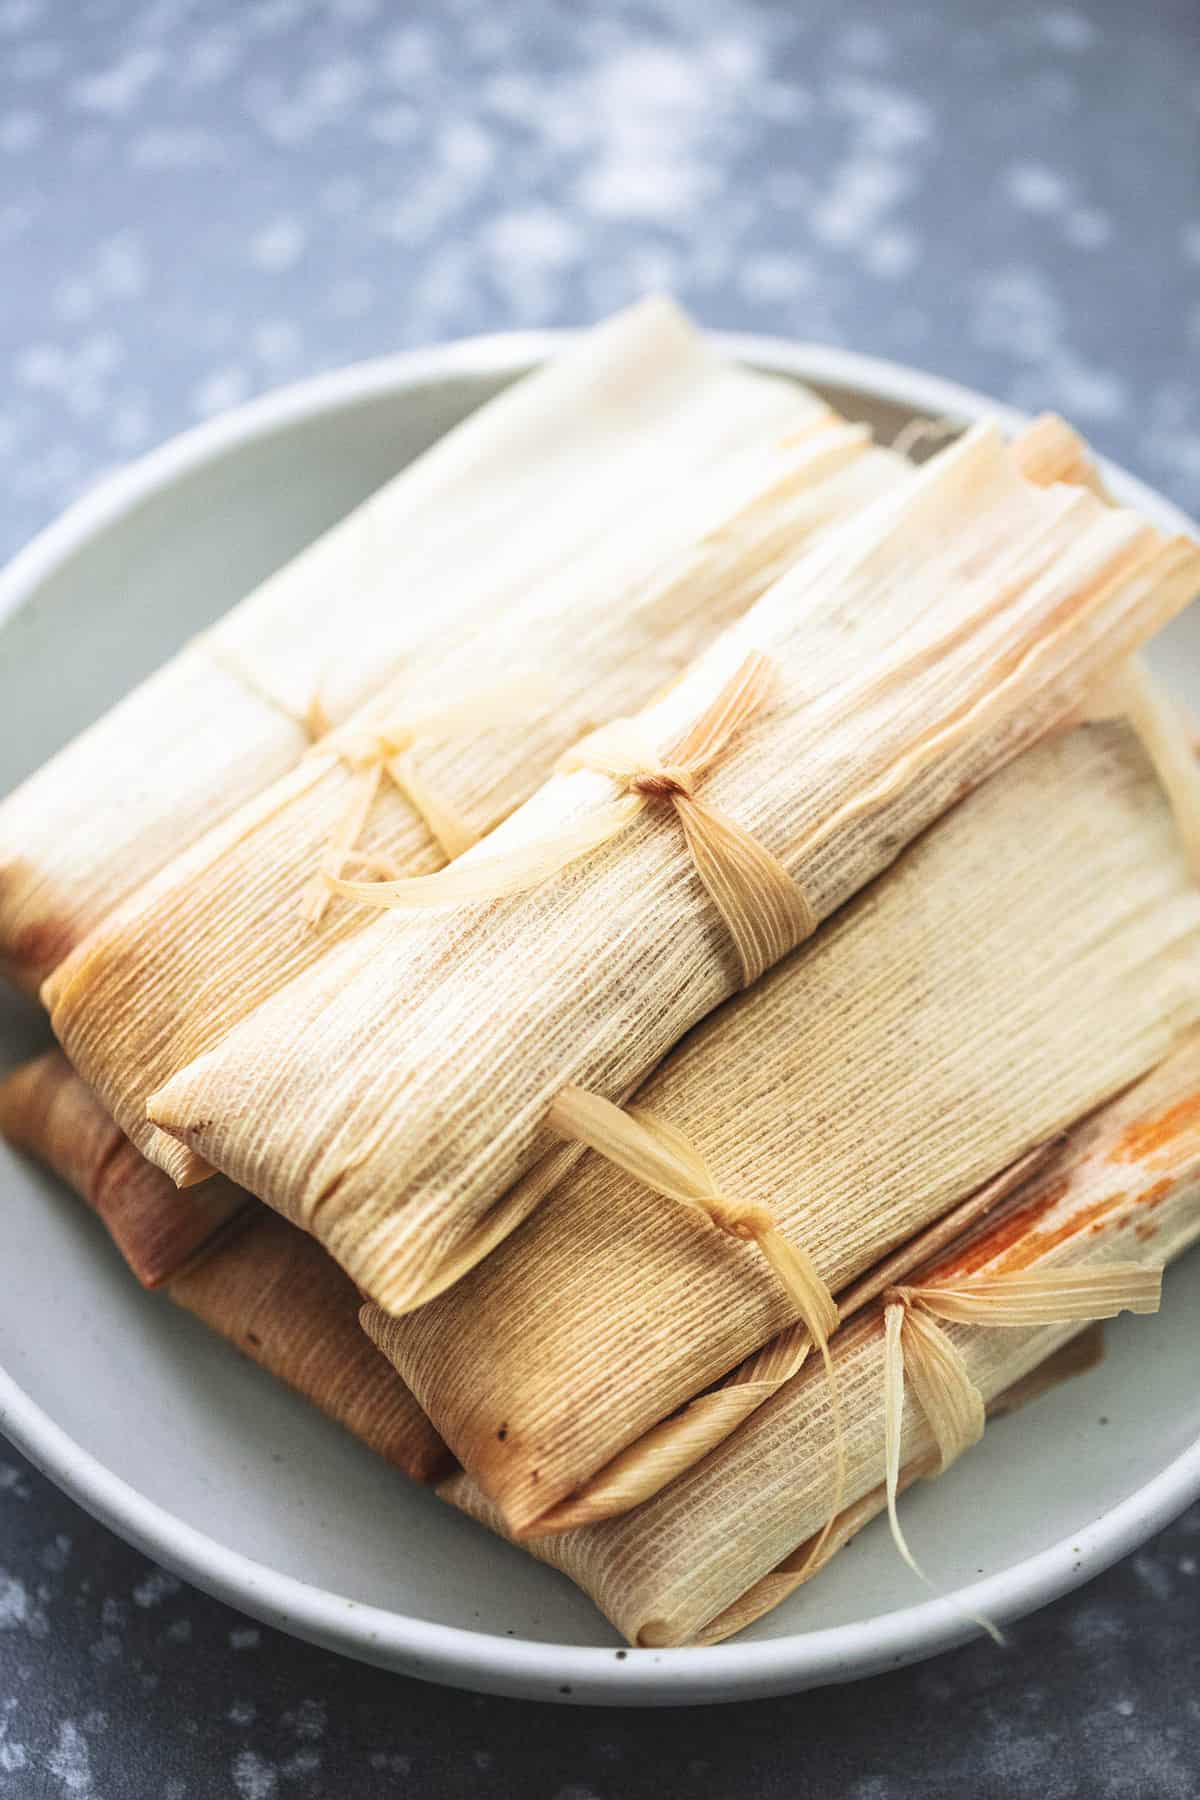 How Long Does It Take To Cook Tamales On The Stove